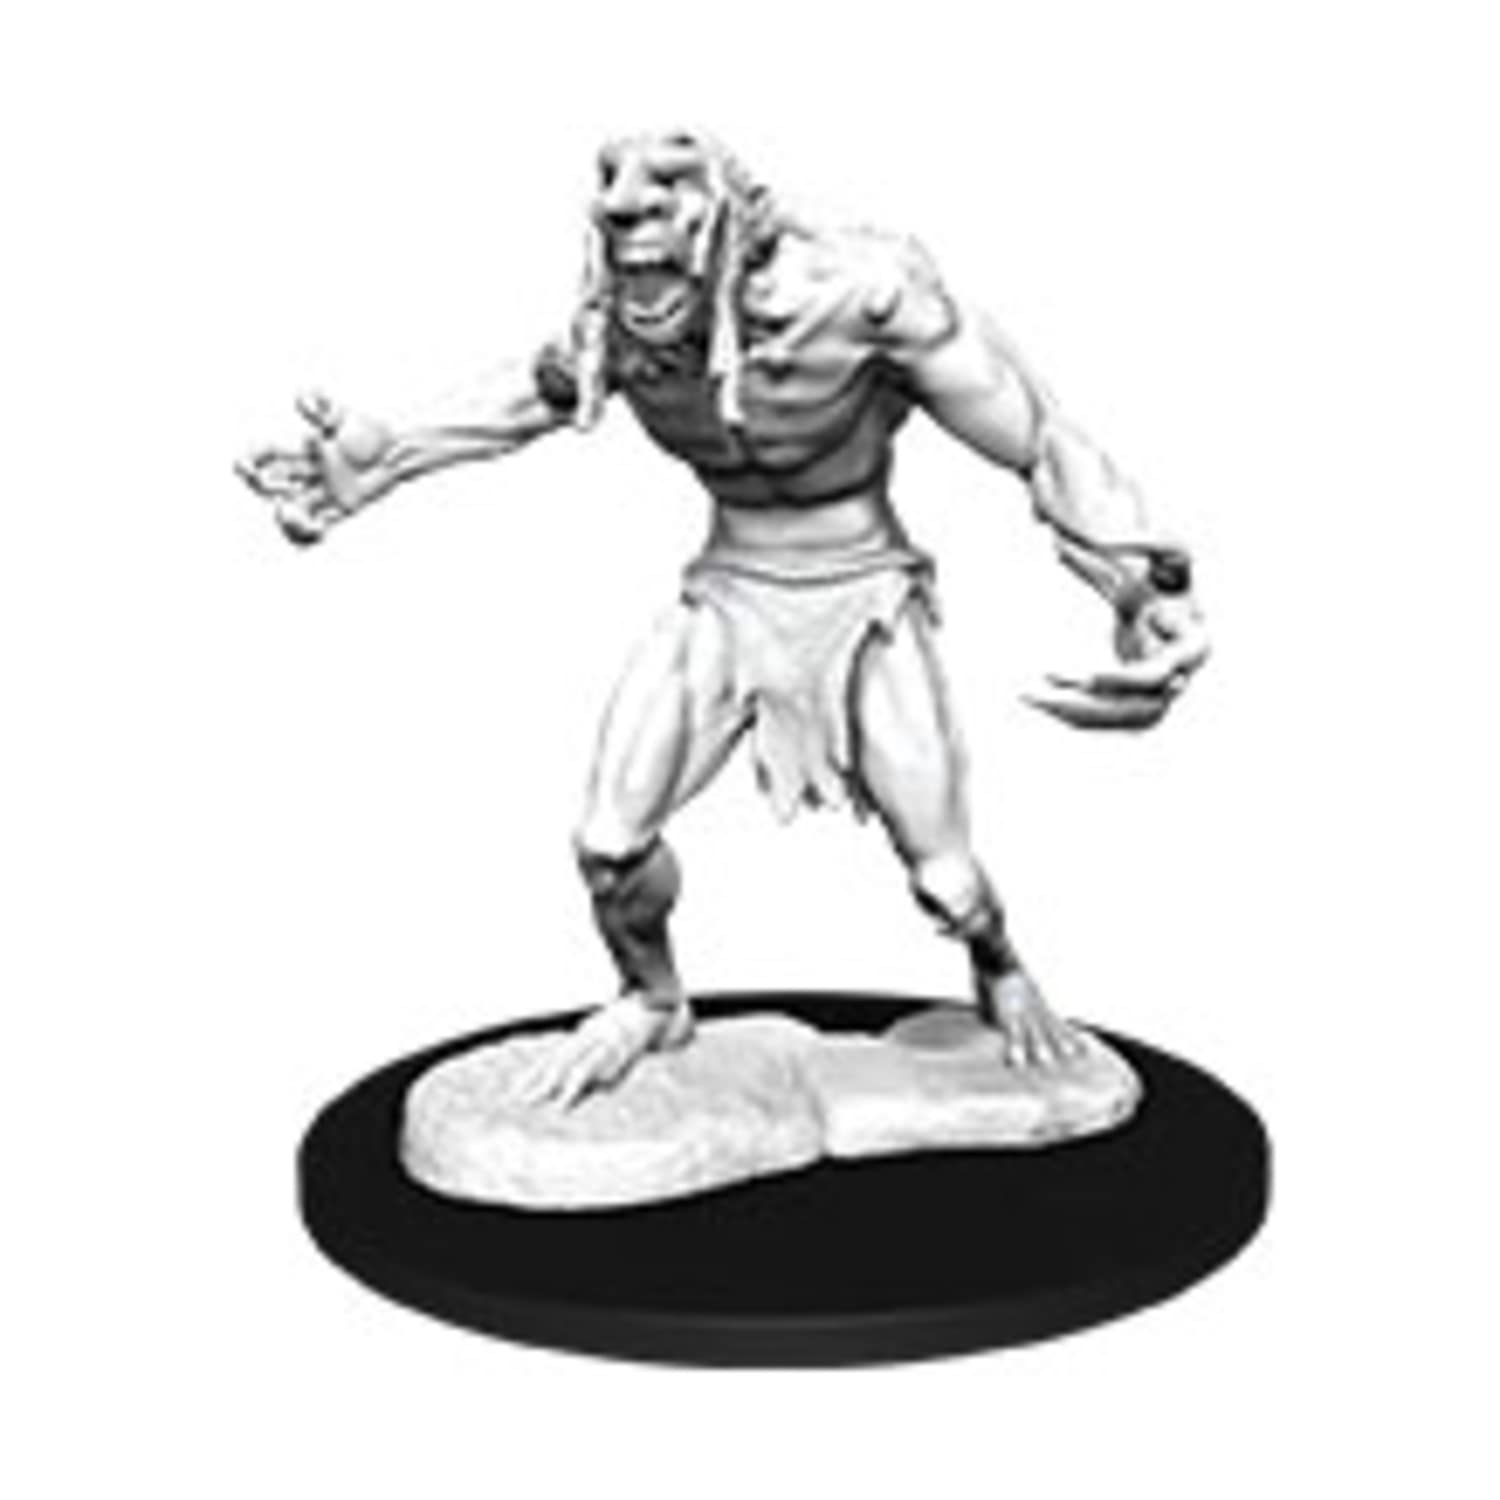 Dungeons & Dragons: Nolzur's Marvelous Unpainted Miniatures - W12 Raging Troll - Lost City Toys